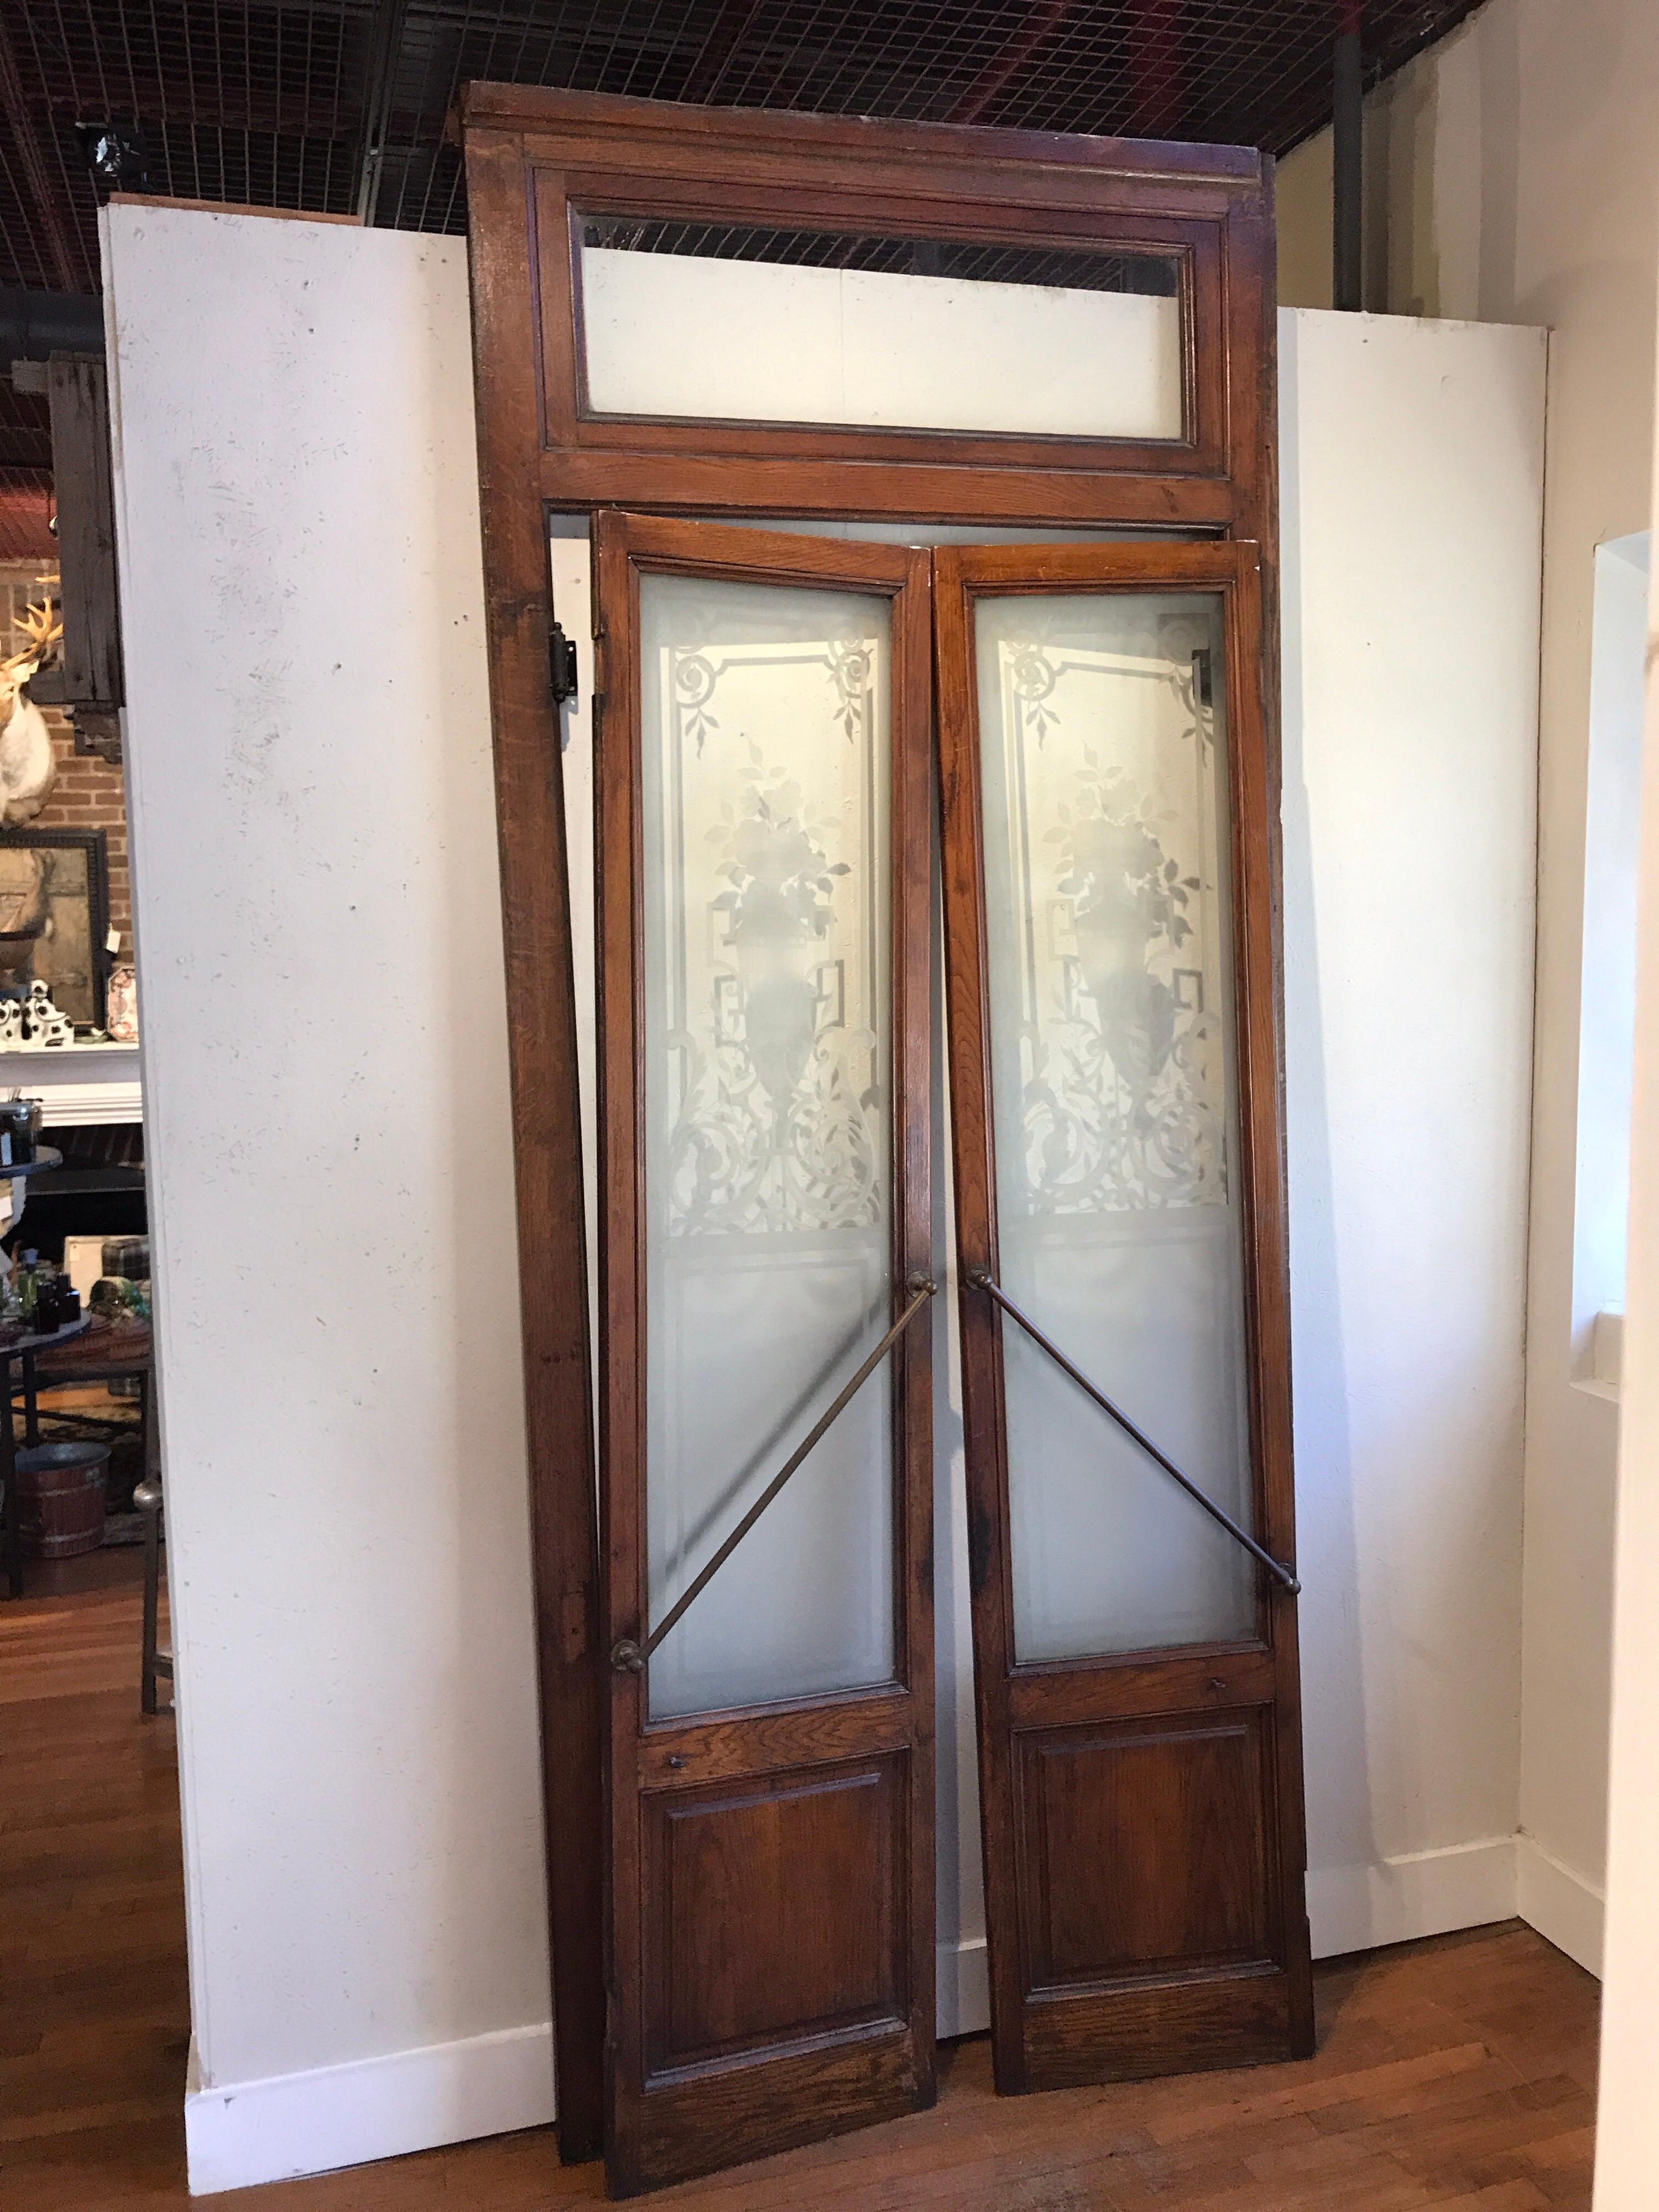 Pair of Belle époque French acid etched Bistro Doors & Transom, Paris 1890-1910
Consisting of a the door frame and two acid etched floral glass doors with original brass and iron handles
The frame measures 117